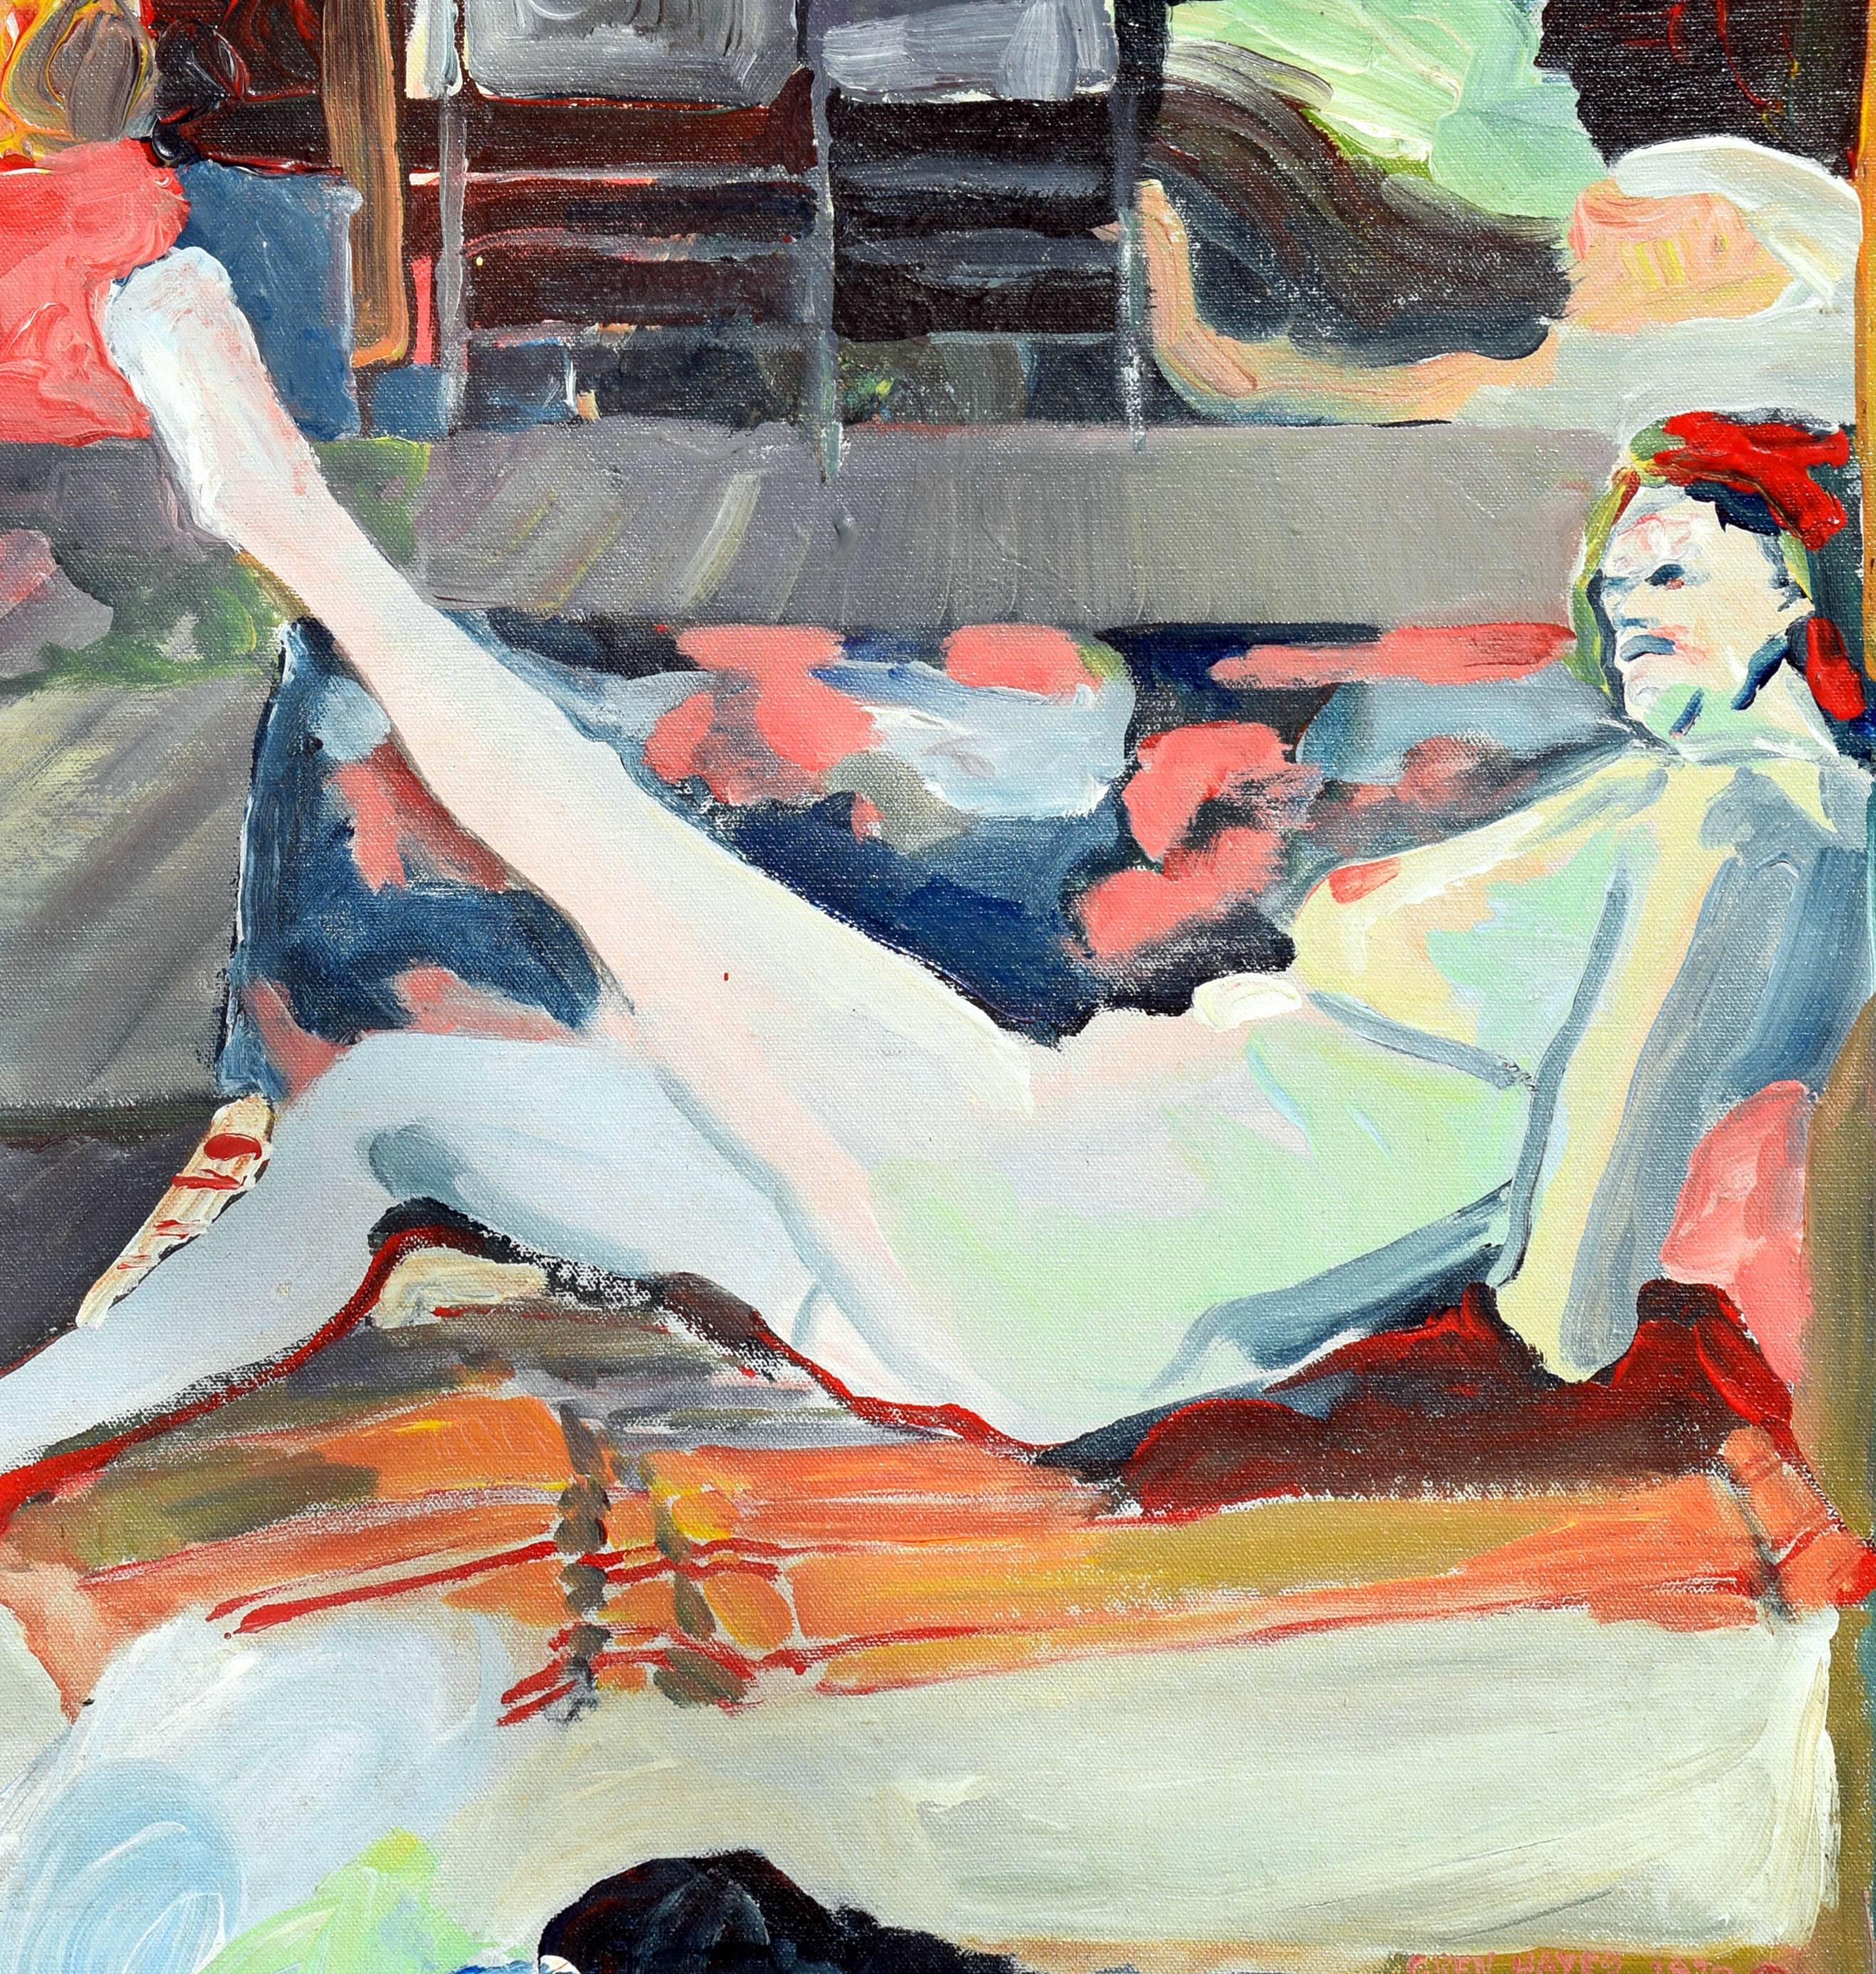 Nude Reclining, Bay Area Figurative Movement - Painting by Patricia Gren Hayes